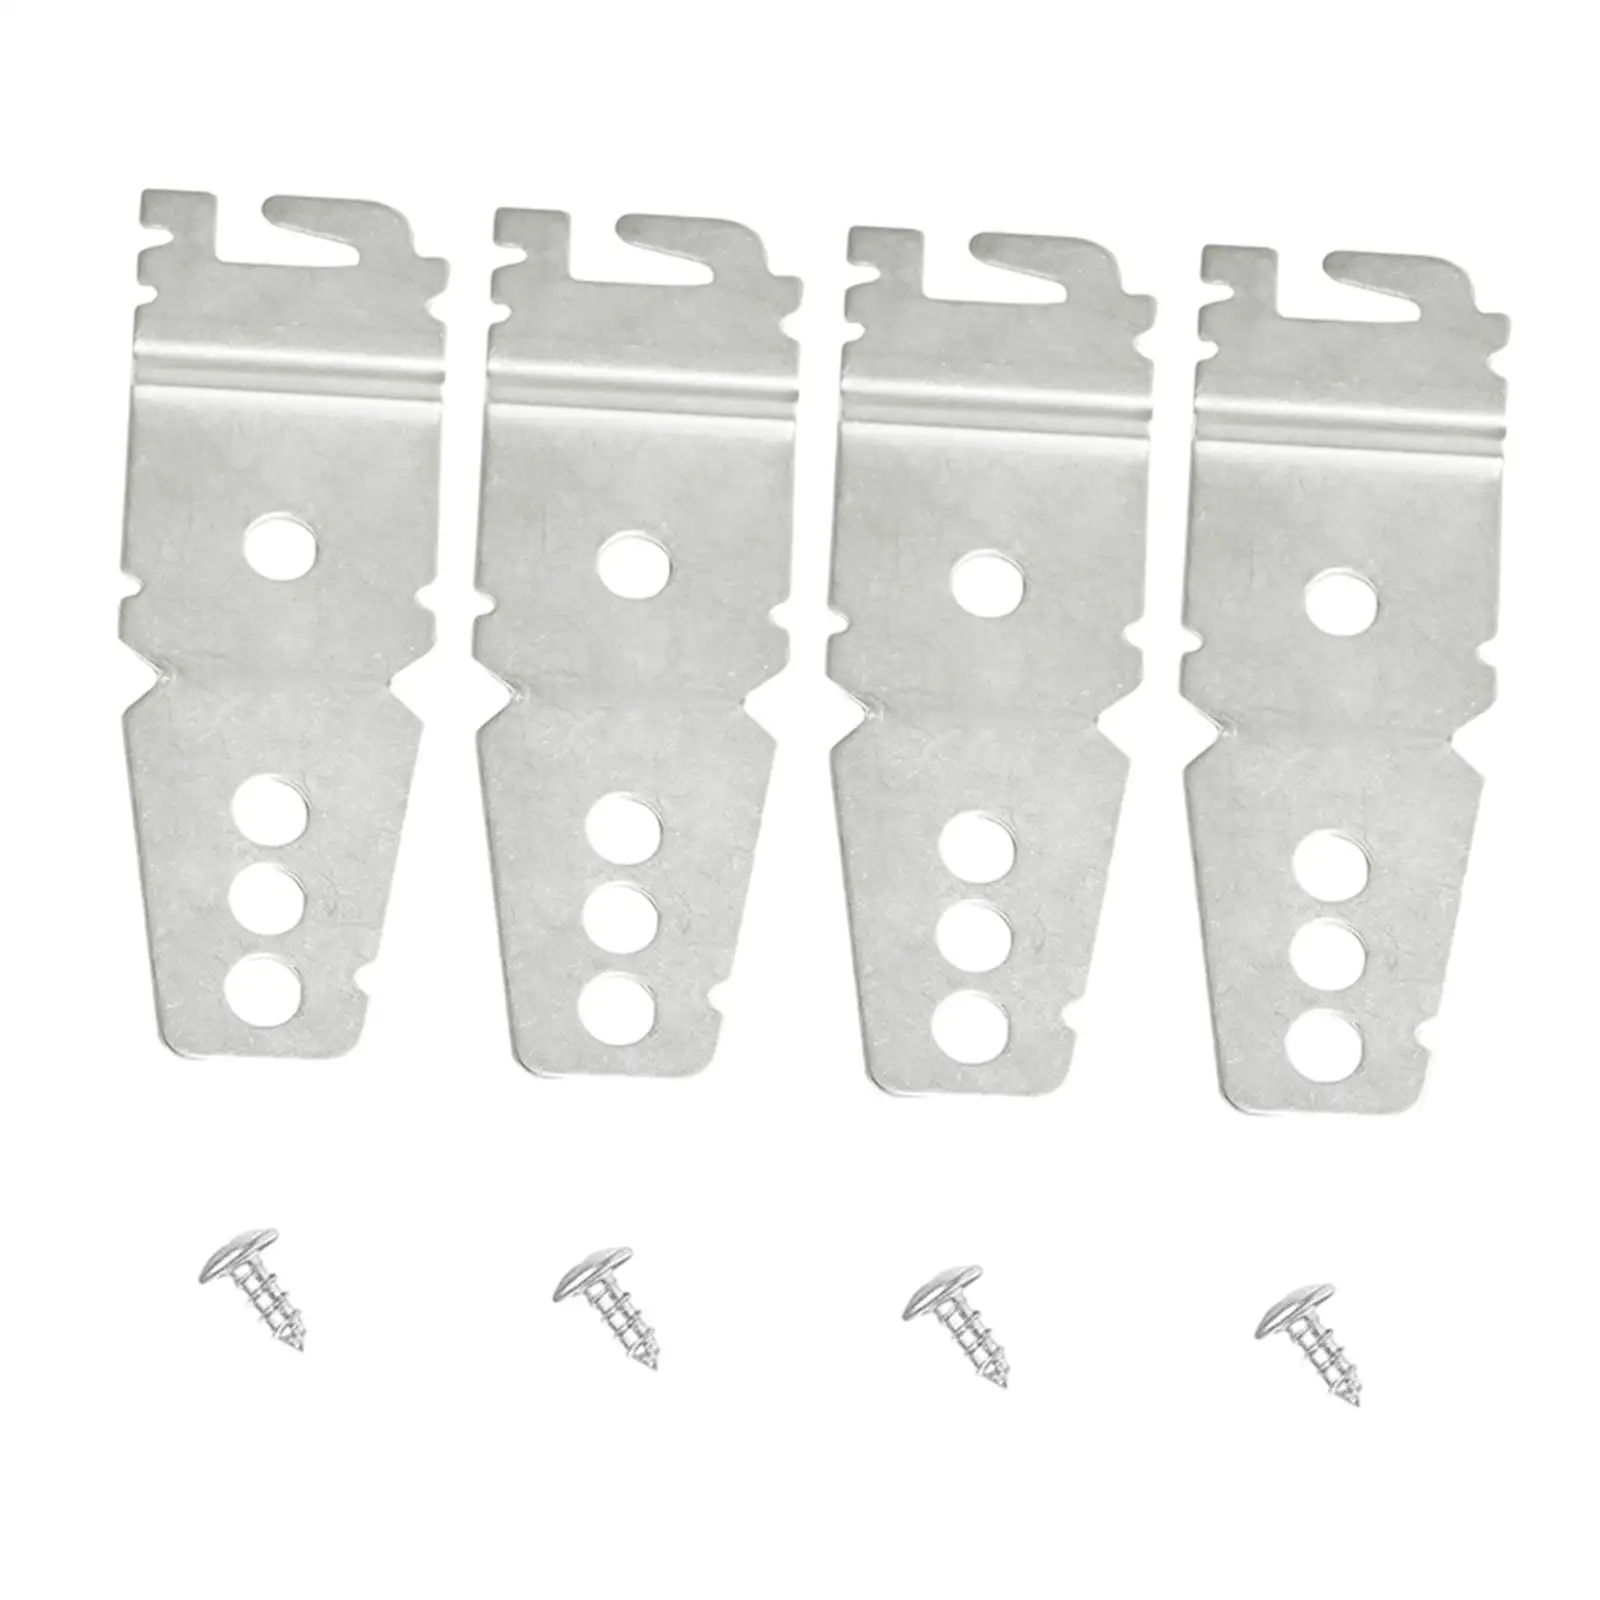 4x 8269145 Dishwasher Mounting Bracket Stable Performance Commercial Grade Accessory Rustproof for WP8269145 AP3039168 PS393134